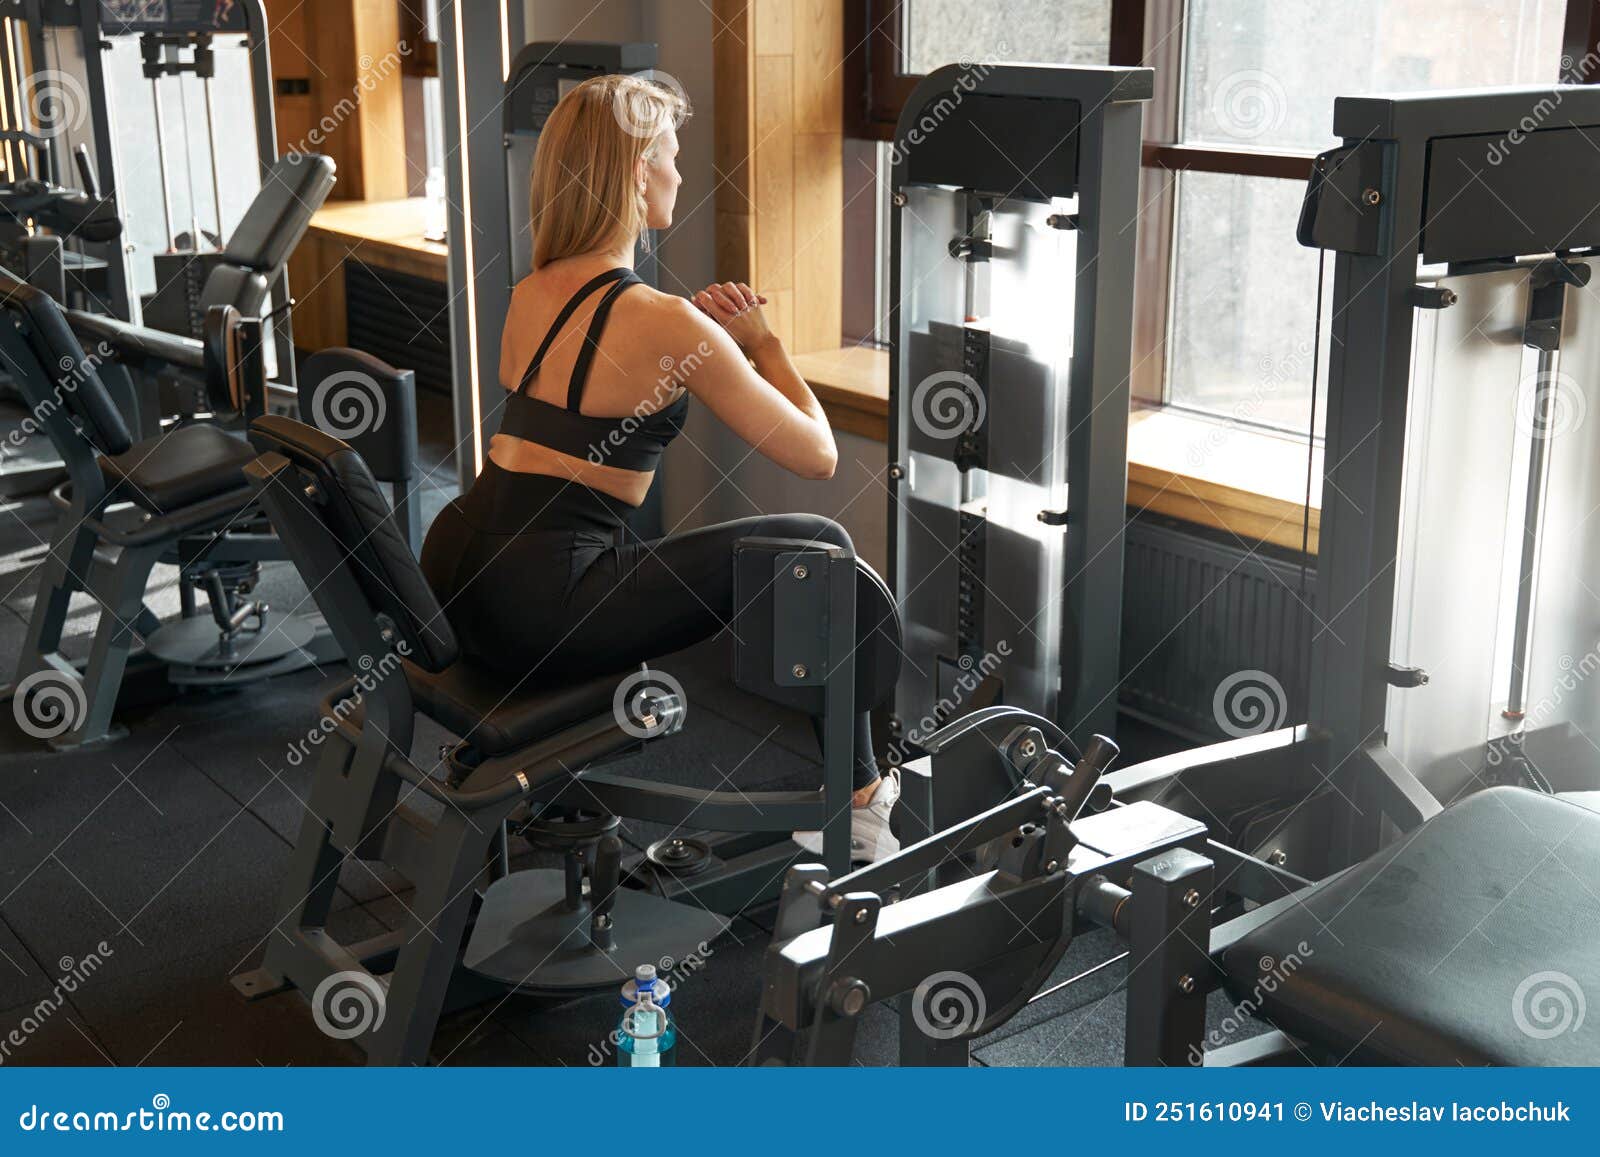 Hip abduction woman exercise at gym indoor opening legs workout Stock Photo  - Alamy